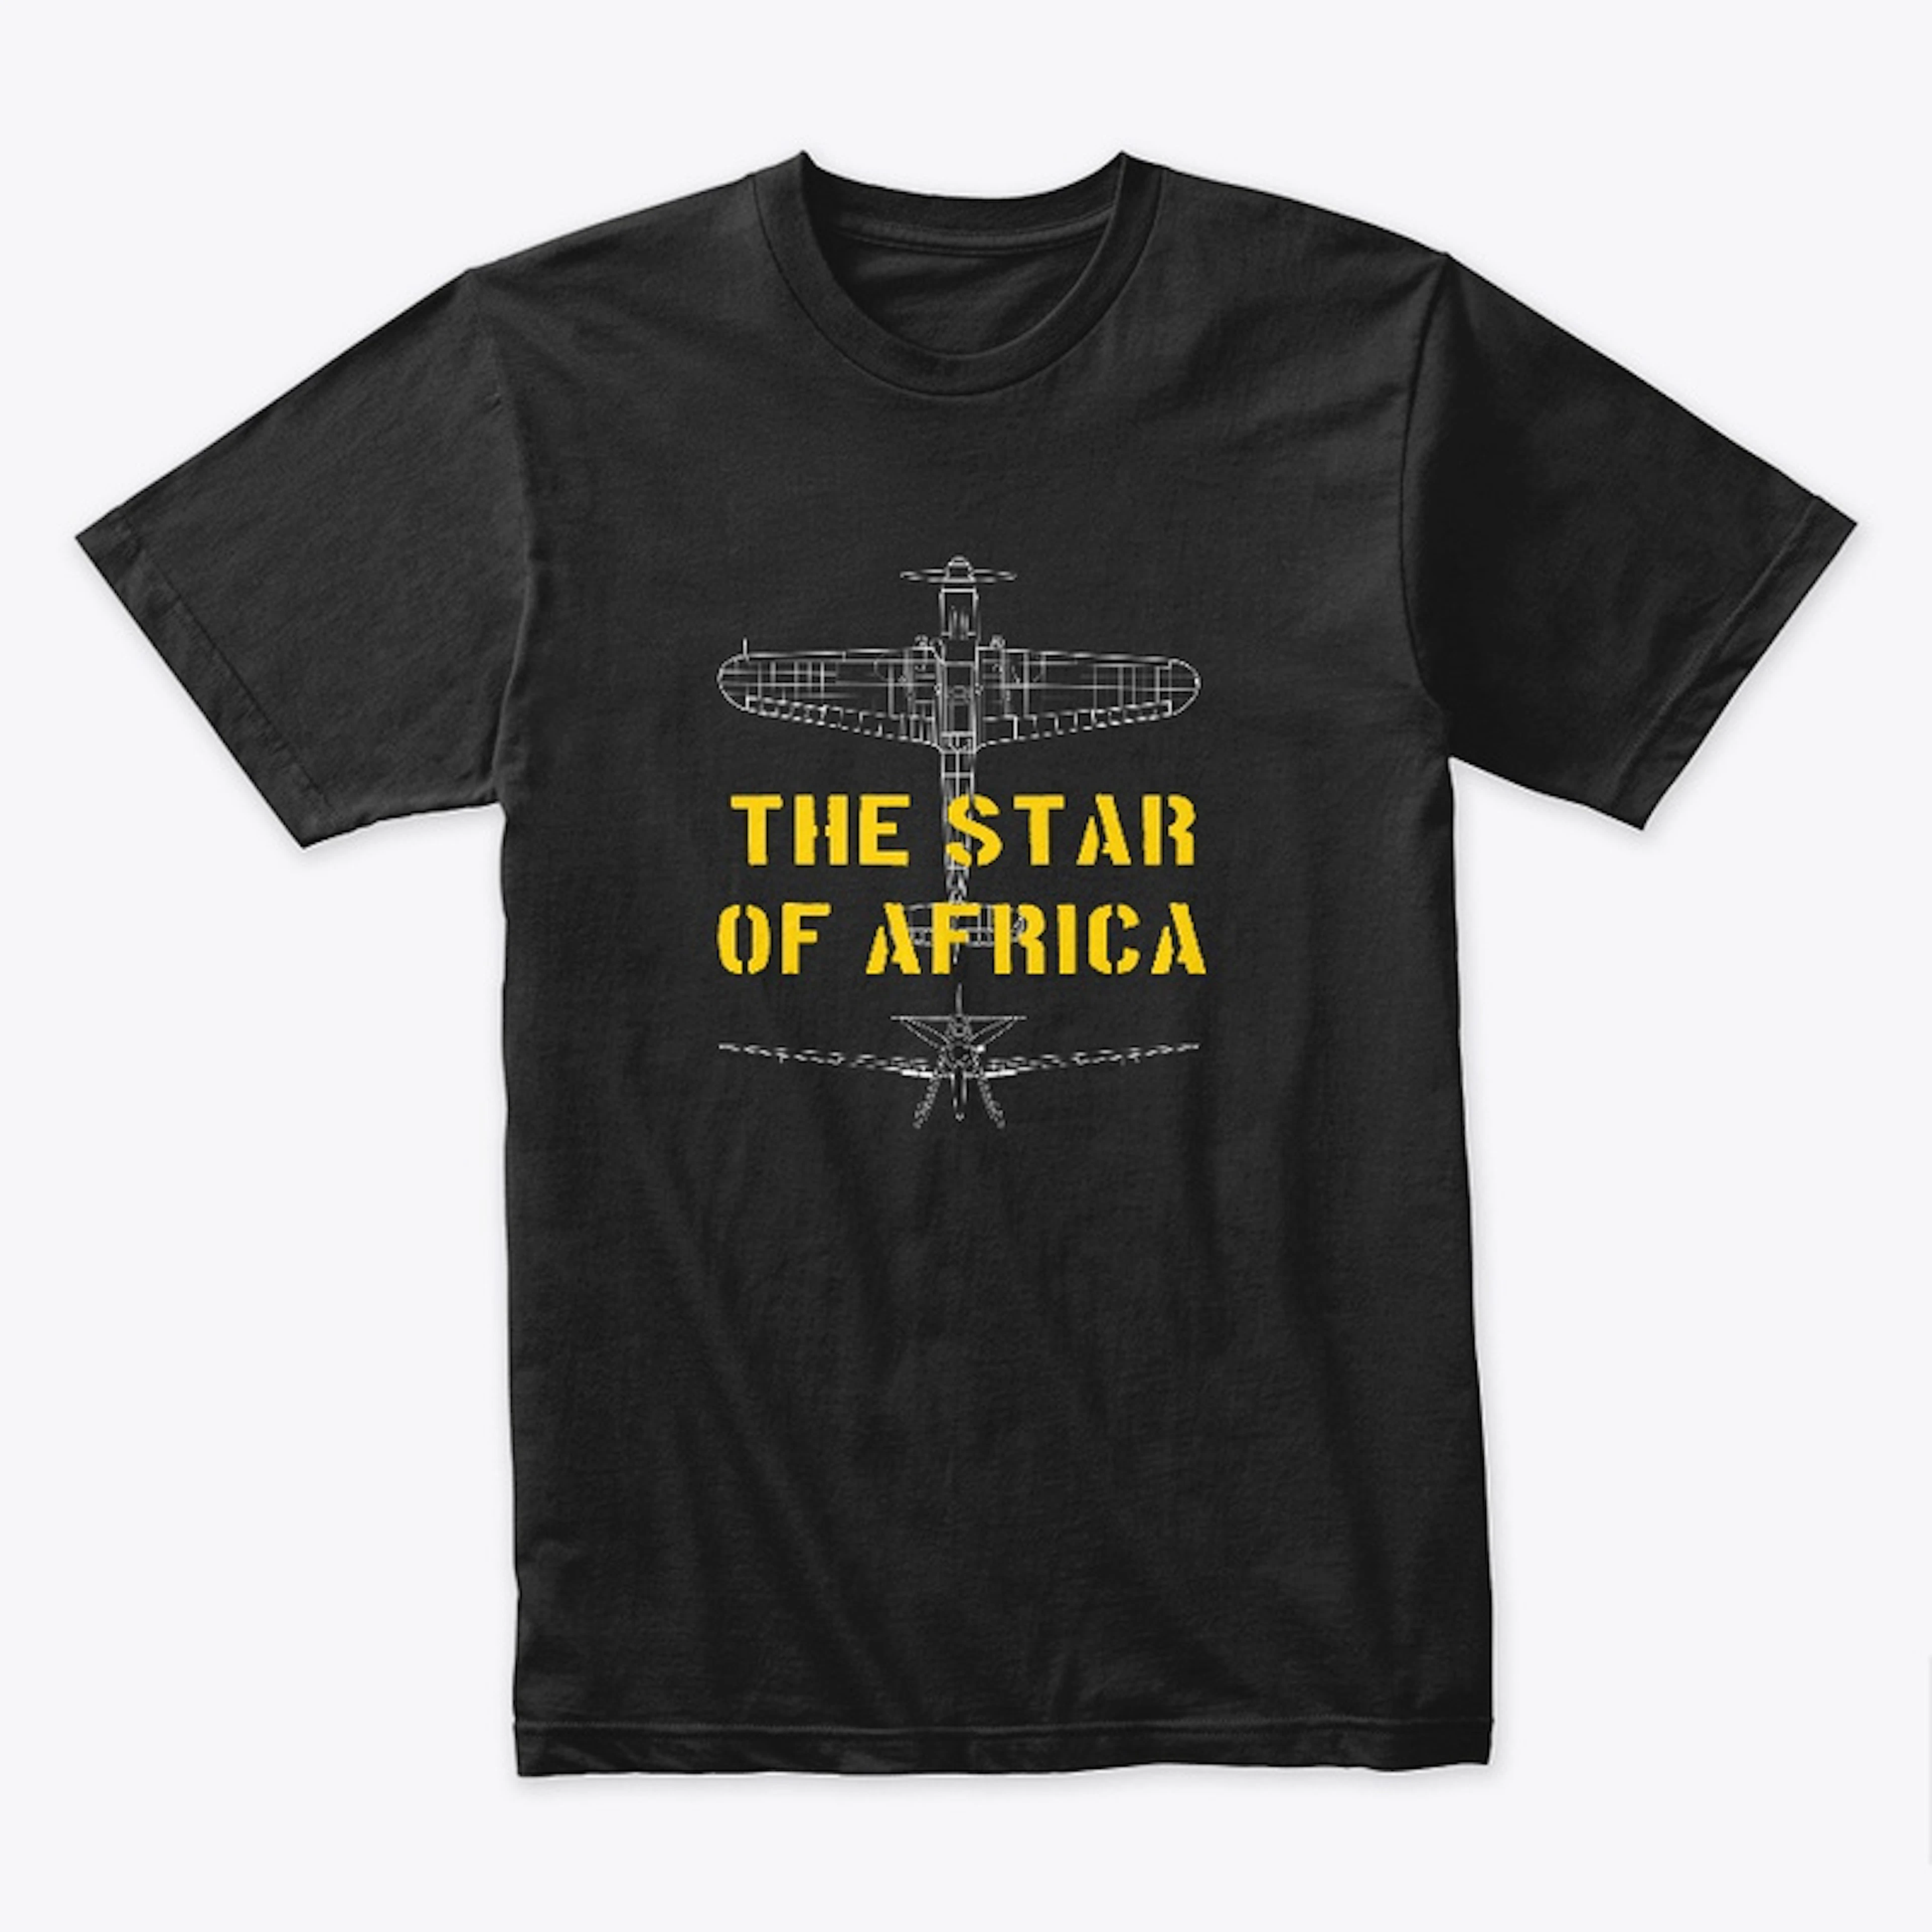 The Star of Africa